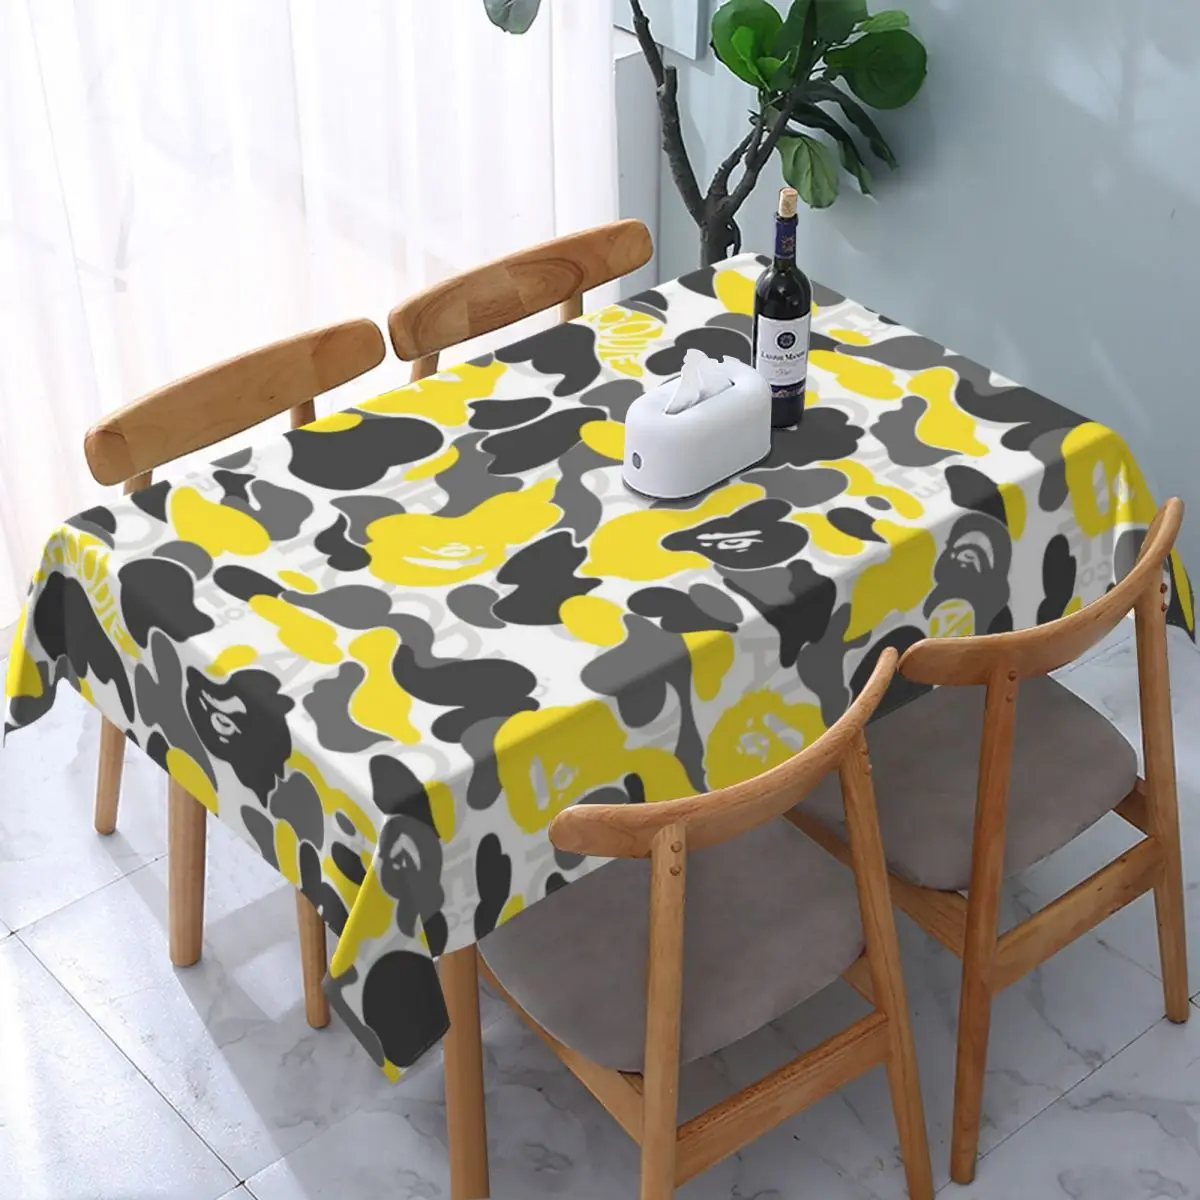 

Yellow Camo Camouflage Pattern Tablecloth Rectangular Fitted Oilproof Table Cloth Cover for Dining Room